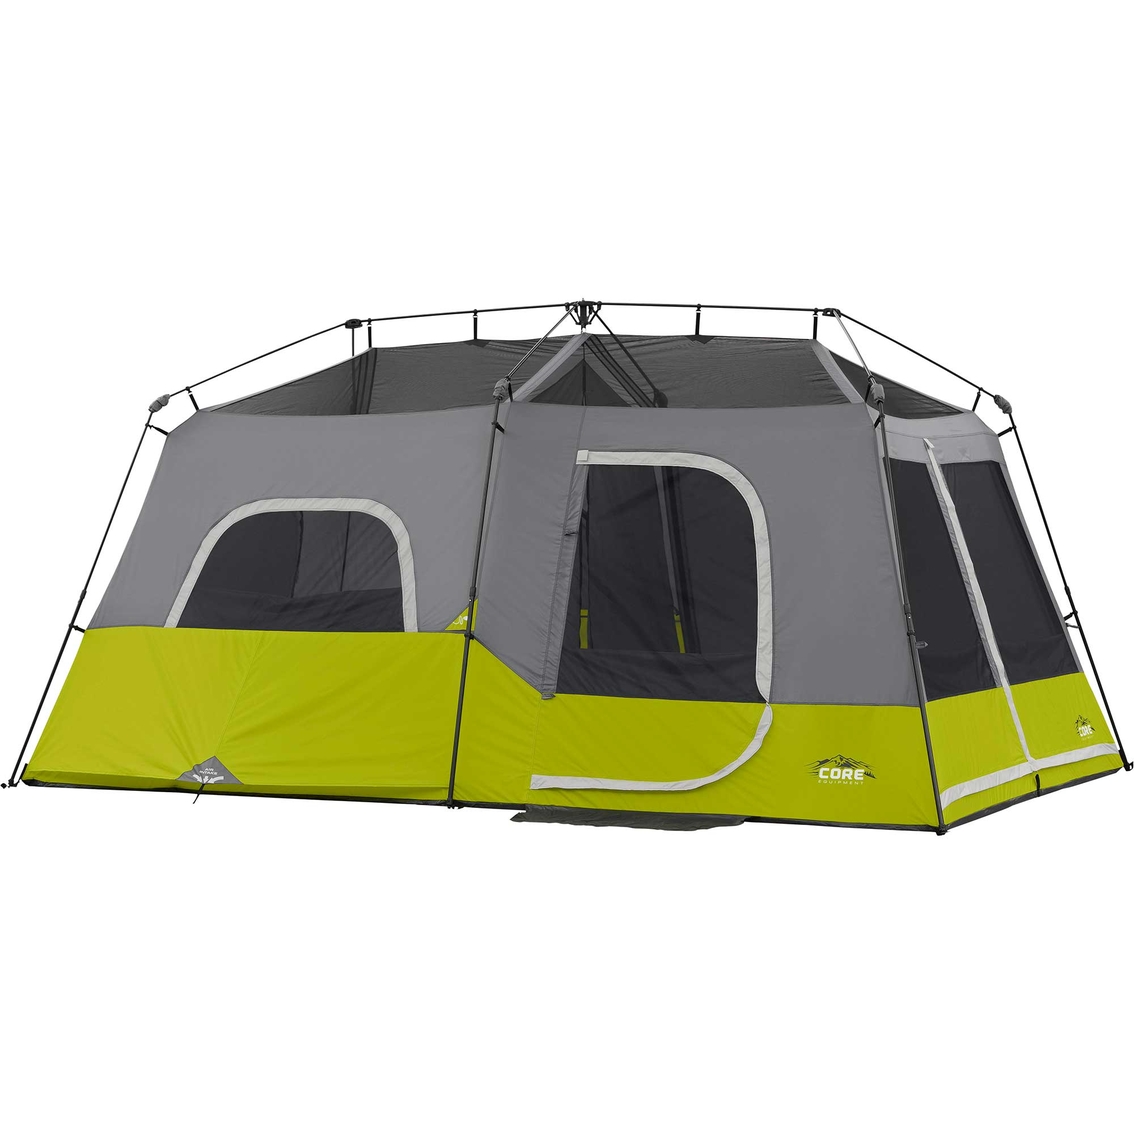 Core Equipment 9 Person Instant Cabin Tent - Image 2 of 10